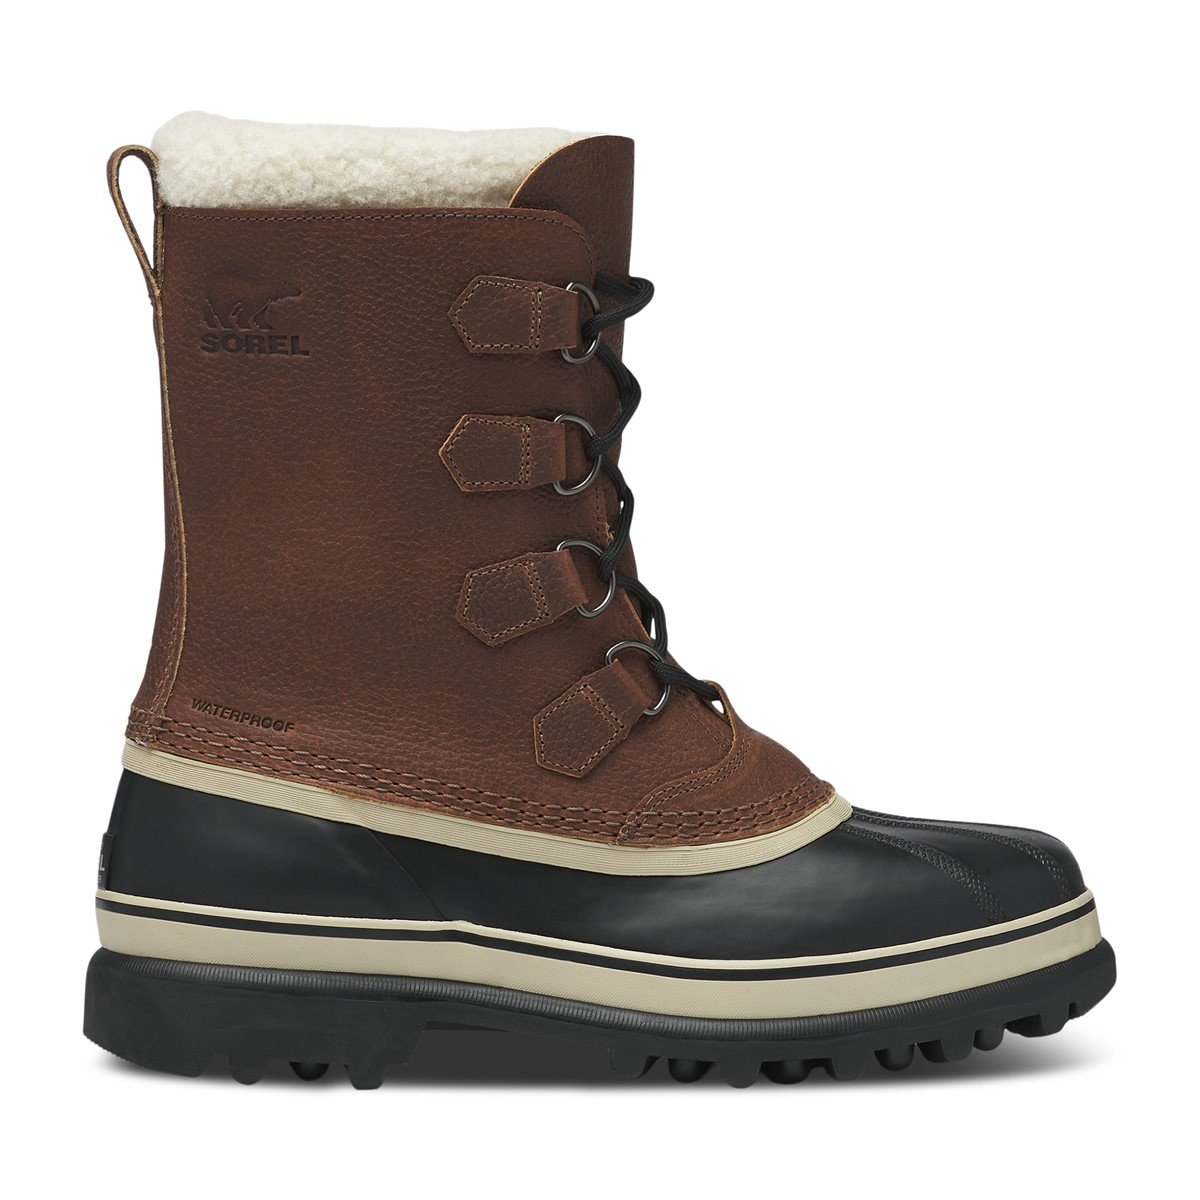 Men's Caribou Wool Winter Boots in Brown